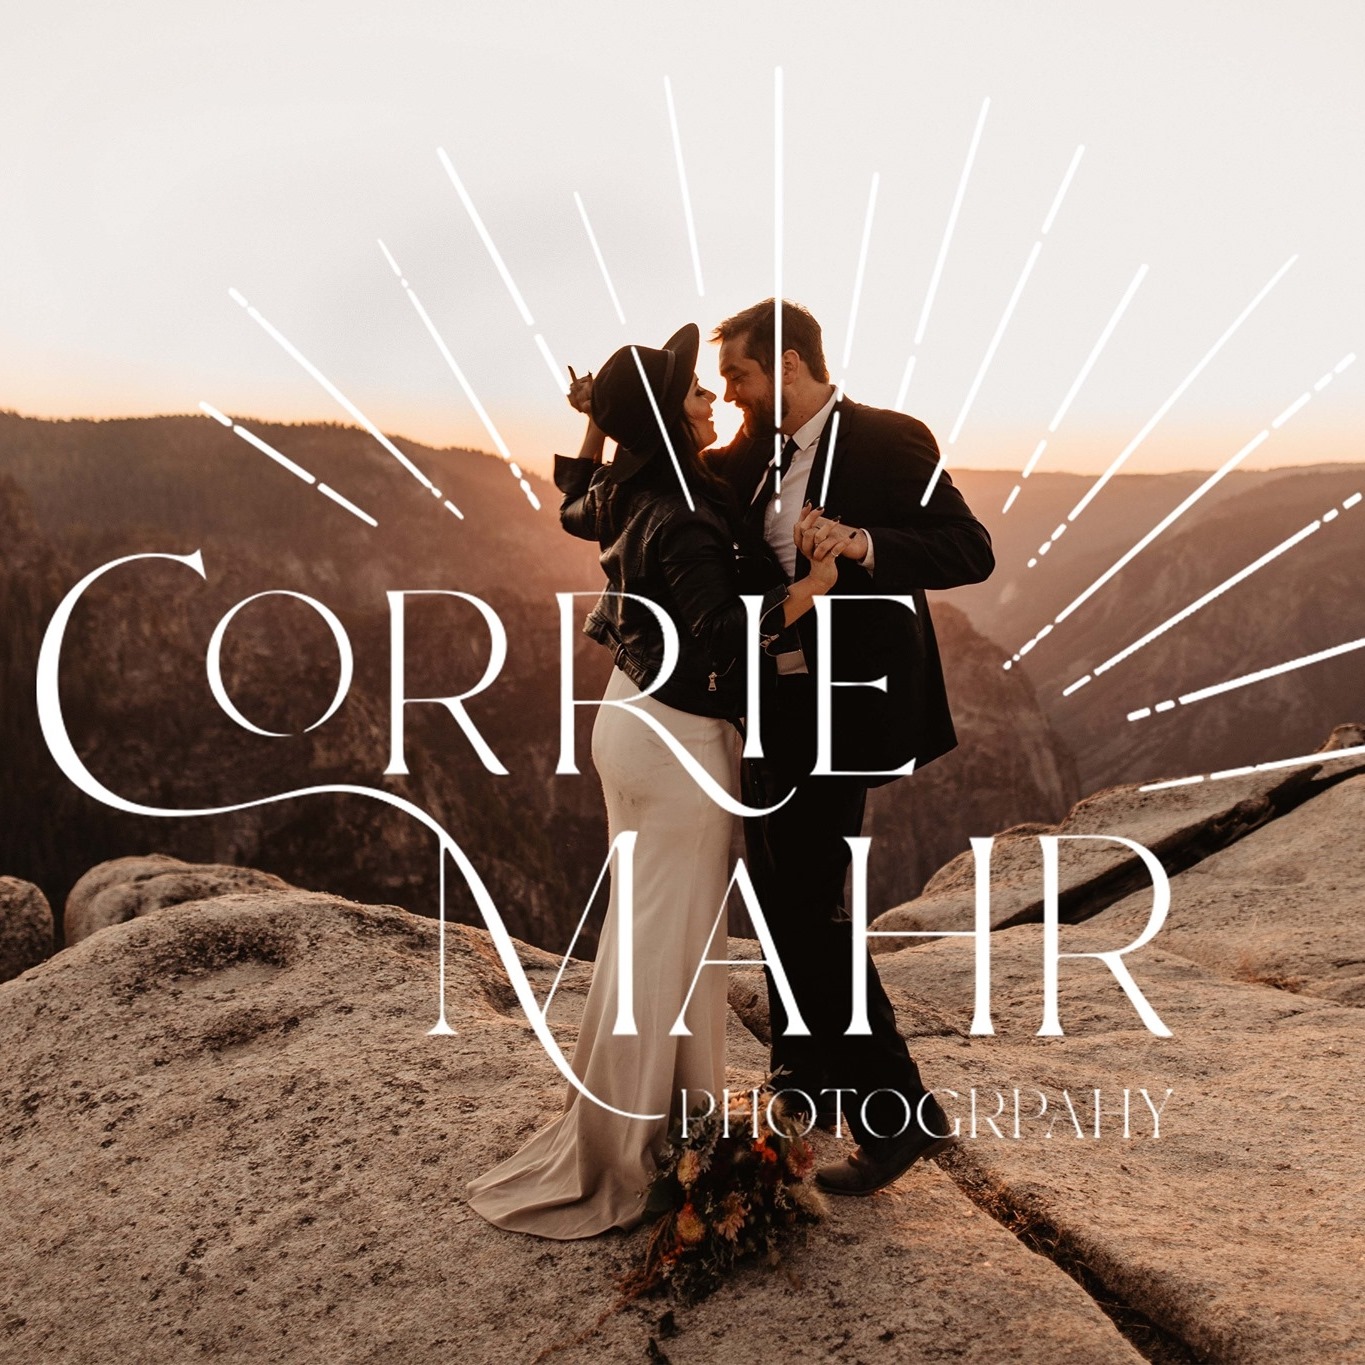 Business logo of Corrie Mahr Photography